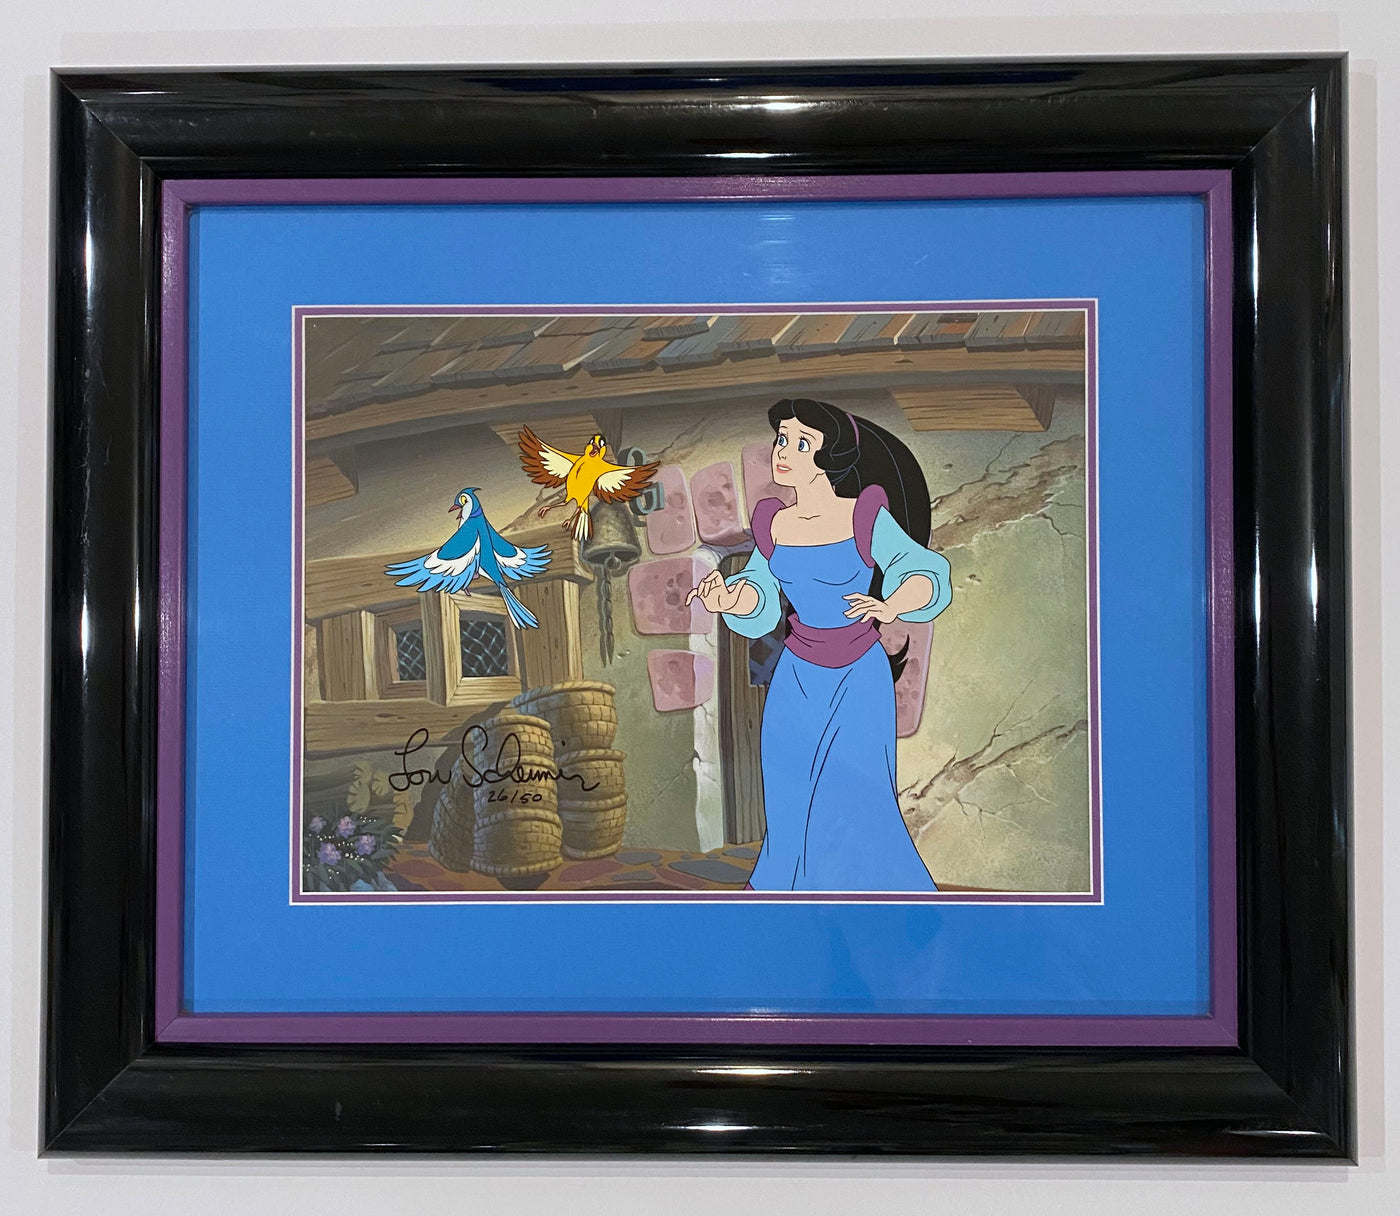 Original Filmation Studios Hand Painted Cel from Happily Ever After featuring Snow White, signed by Lou Scheimer